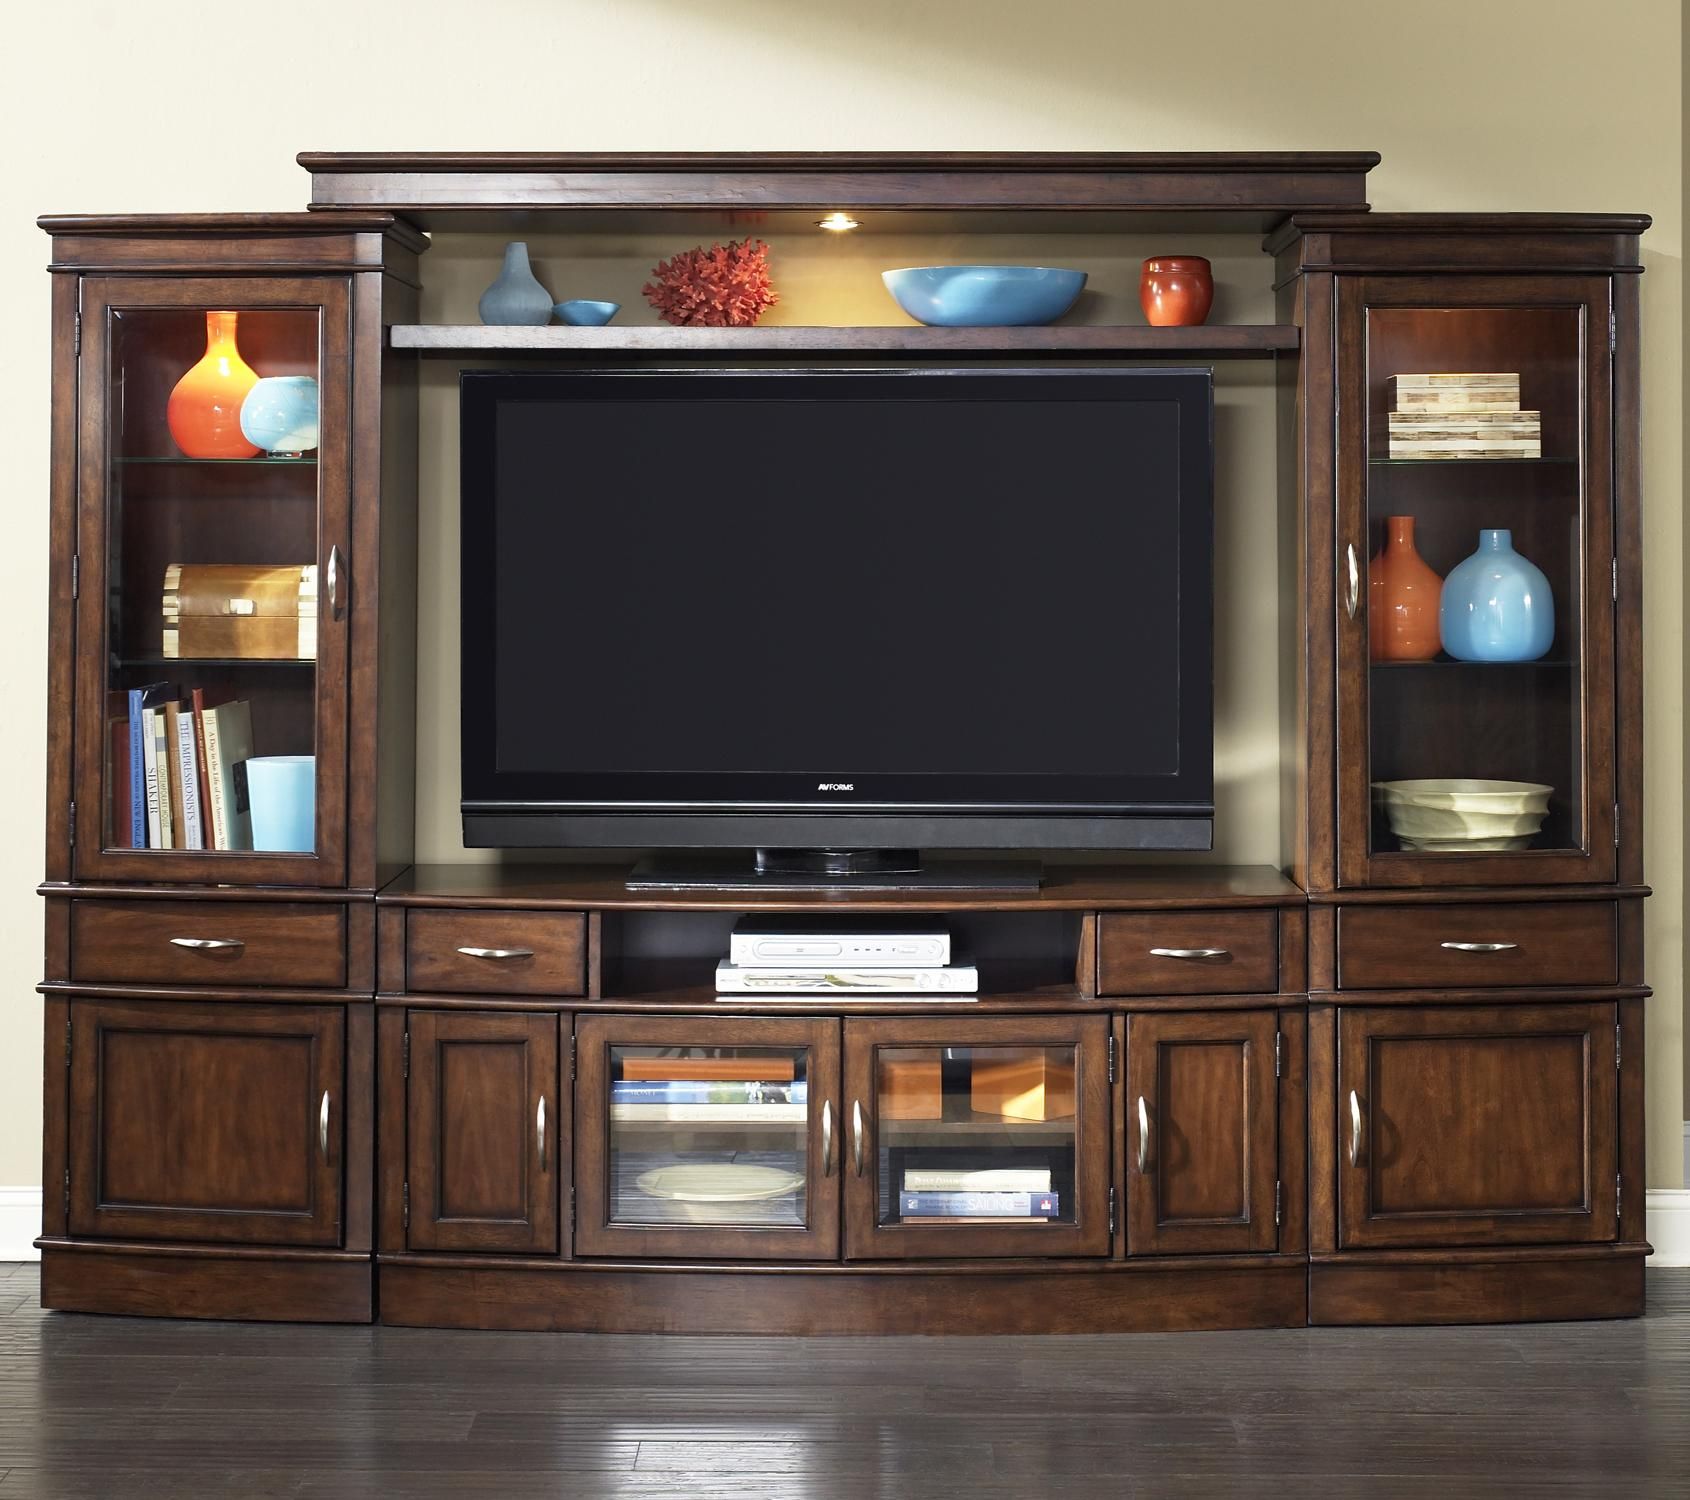 Complete Tv Entertainment Centerliberty Furniture | Wolf Furniture With Regard To Wide Entertainment Centers (View 2 of 20)